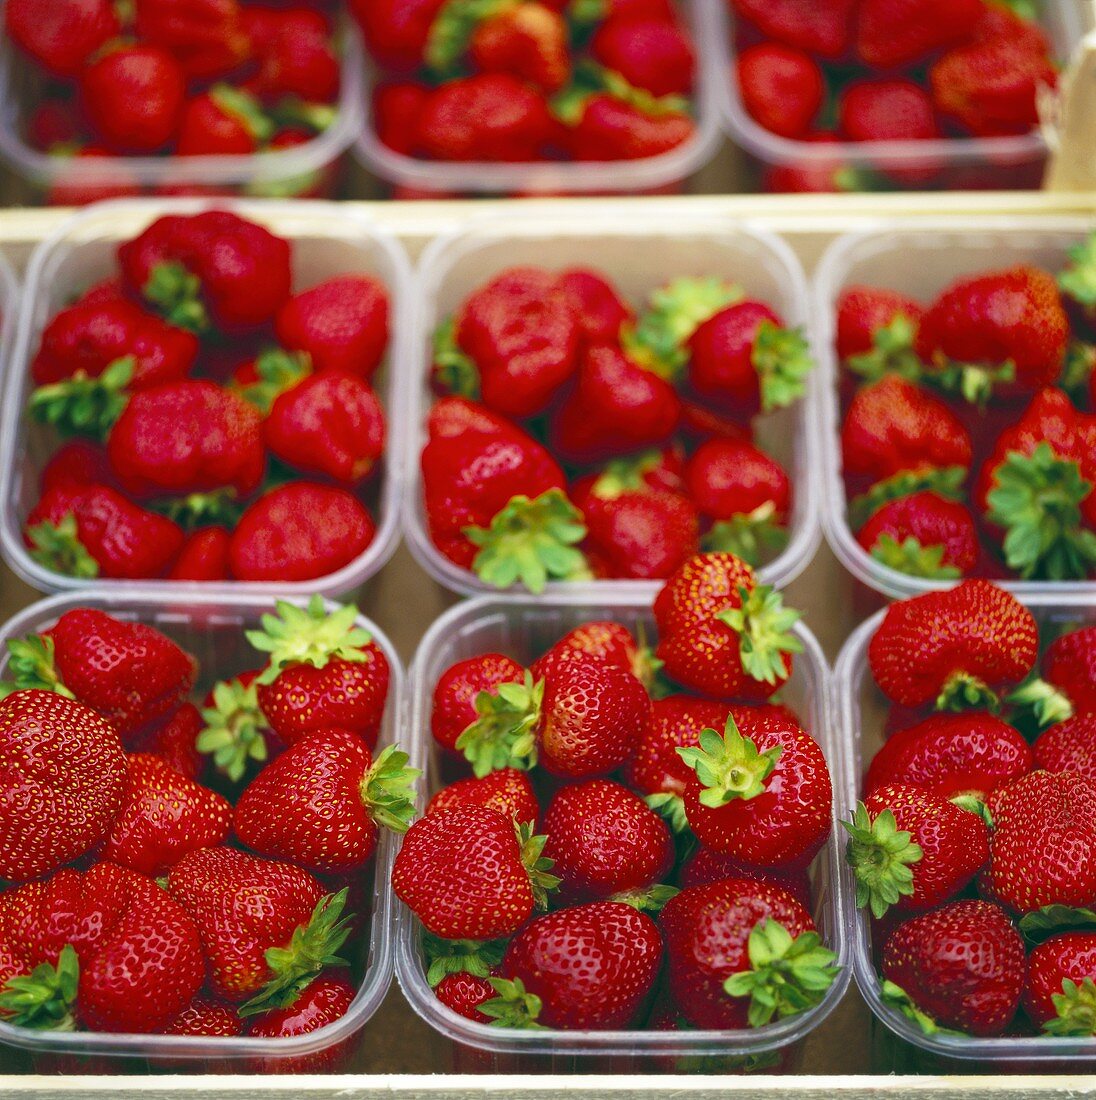 Strawberries in plastic punnets (filling the picture)